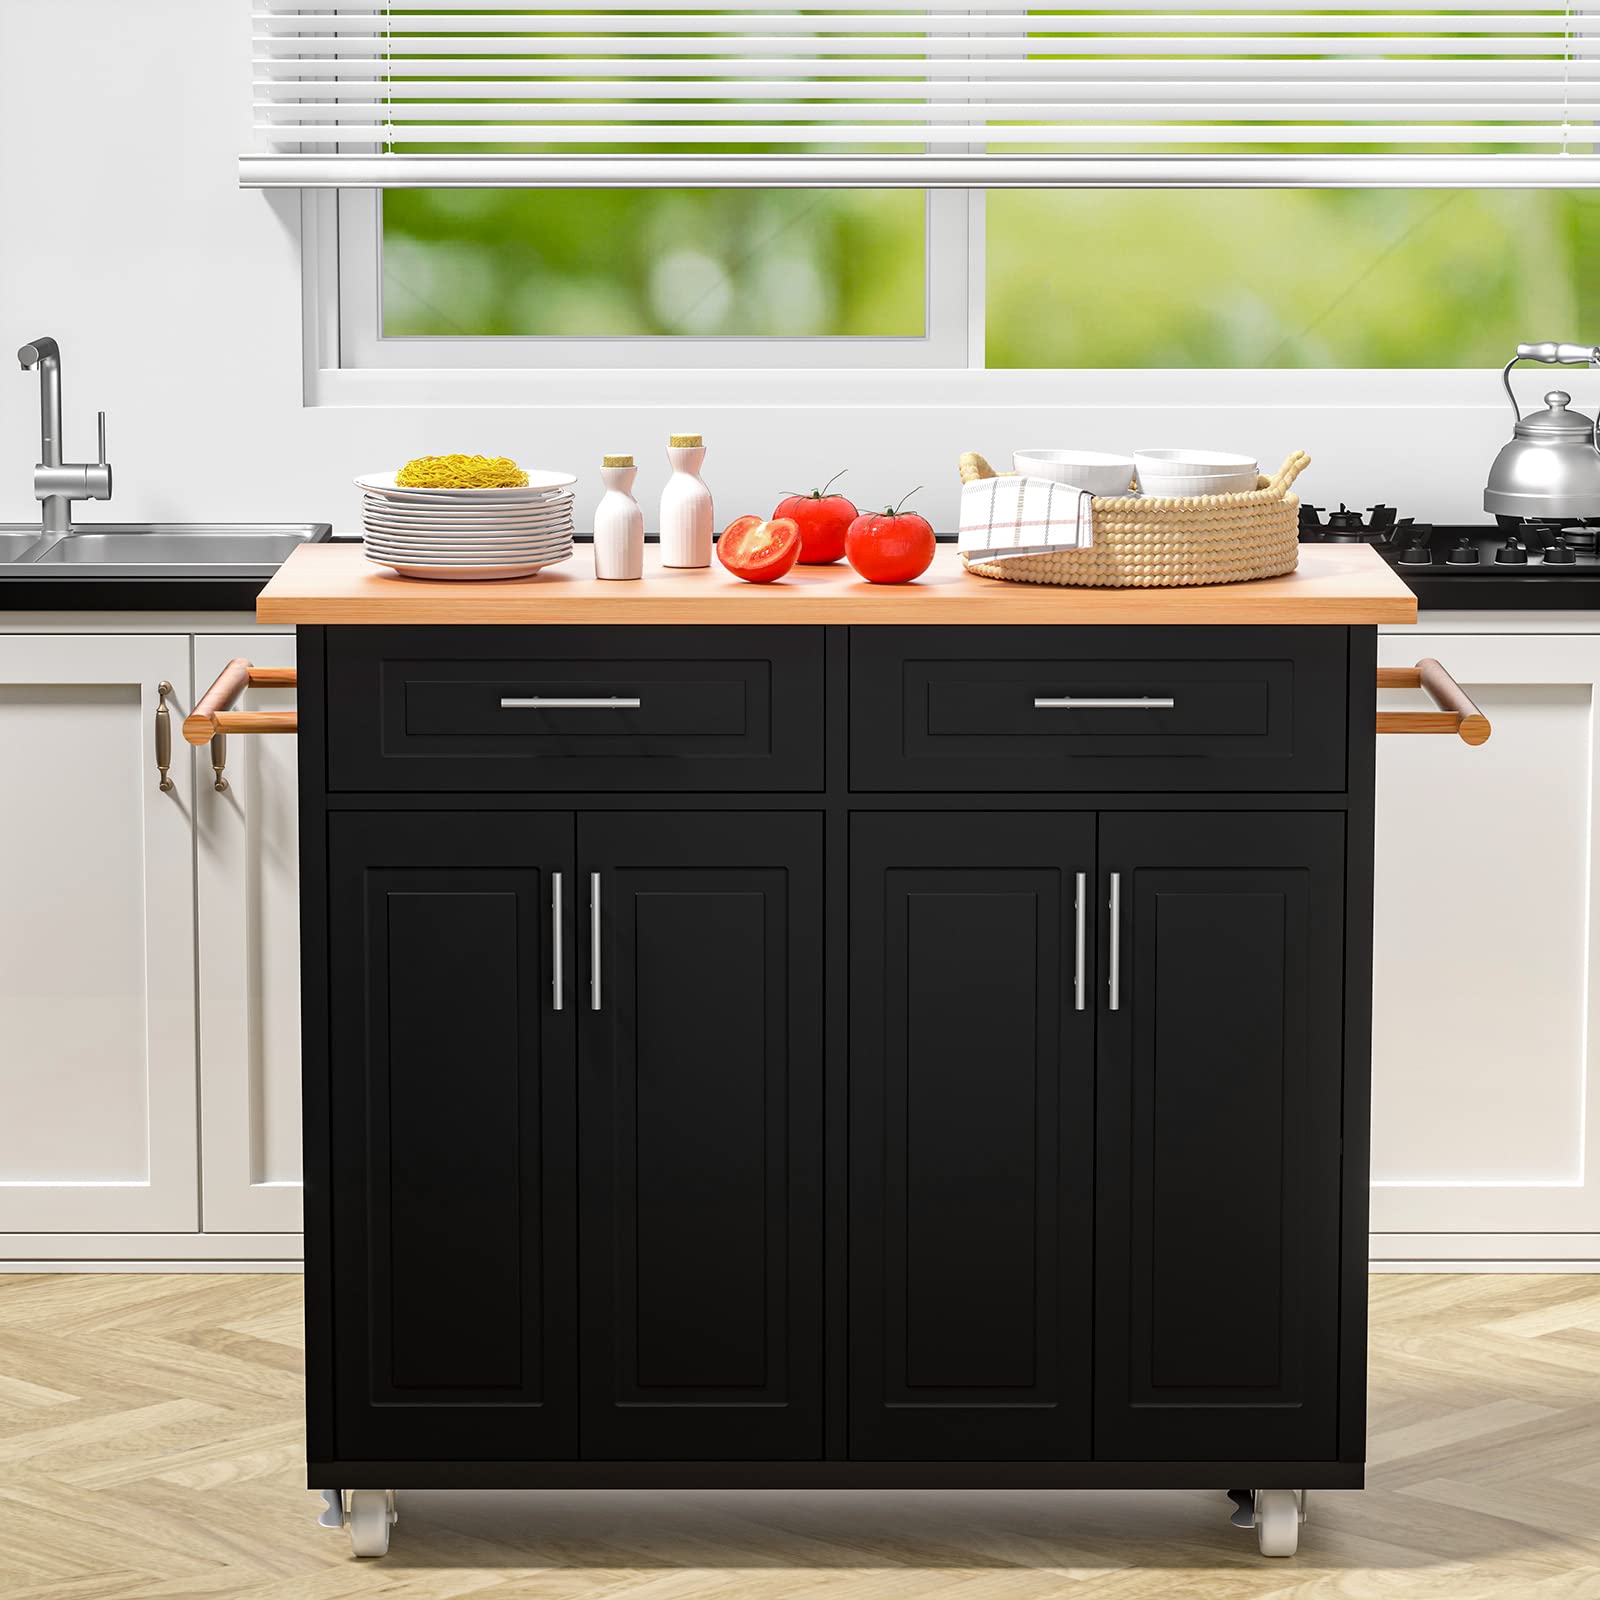 4ever2buy Rolling Kitchen Island, Kitchen Island with Storage on Wheels, Mobile Kitchen Storage cabinets with Drawer and Adjustable Shelf,